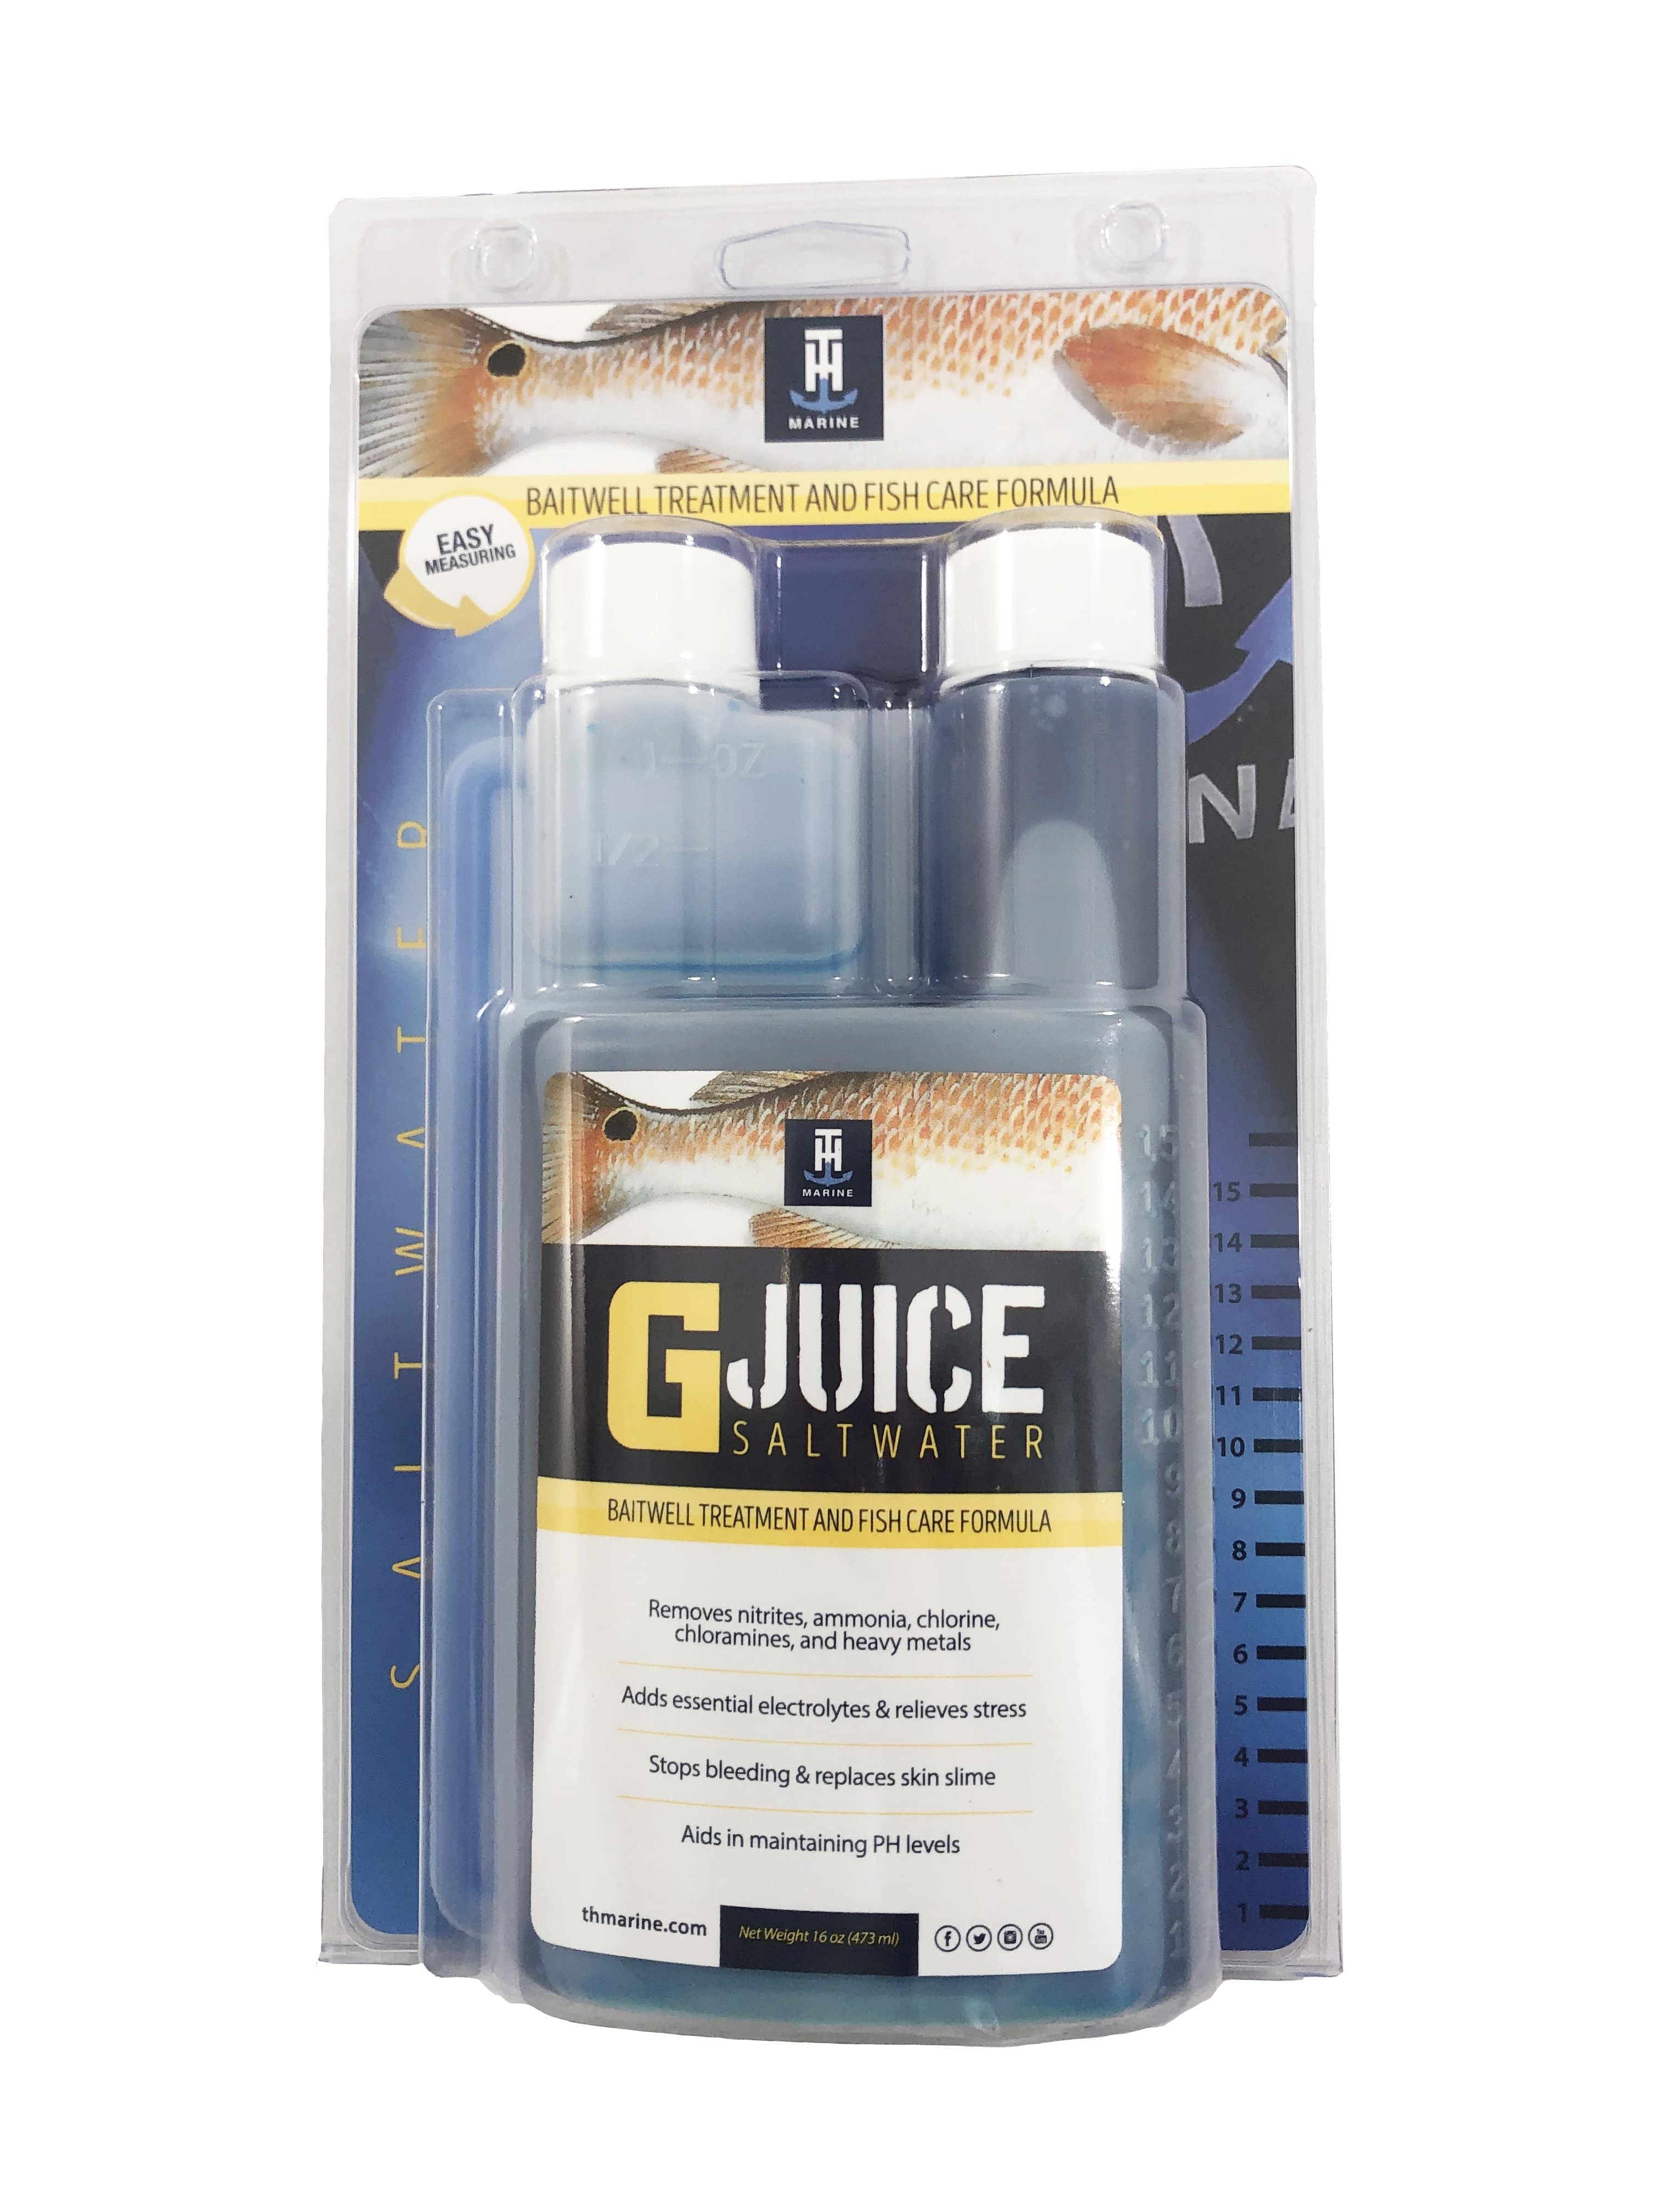 G-Juice Saltwater Treatment and Fish Care Formula